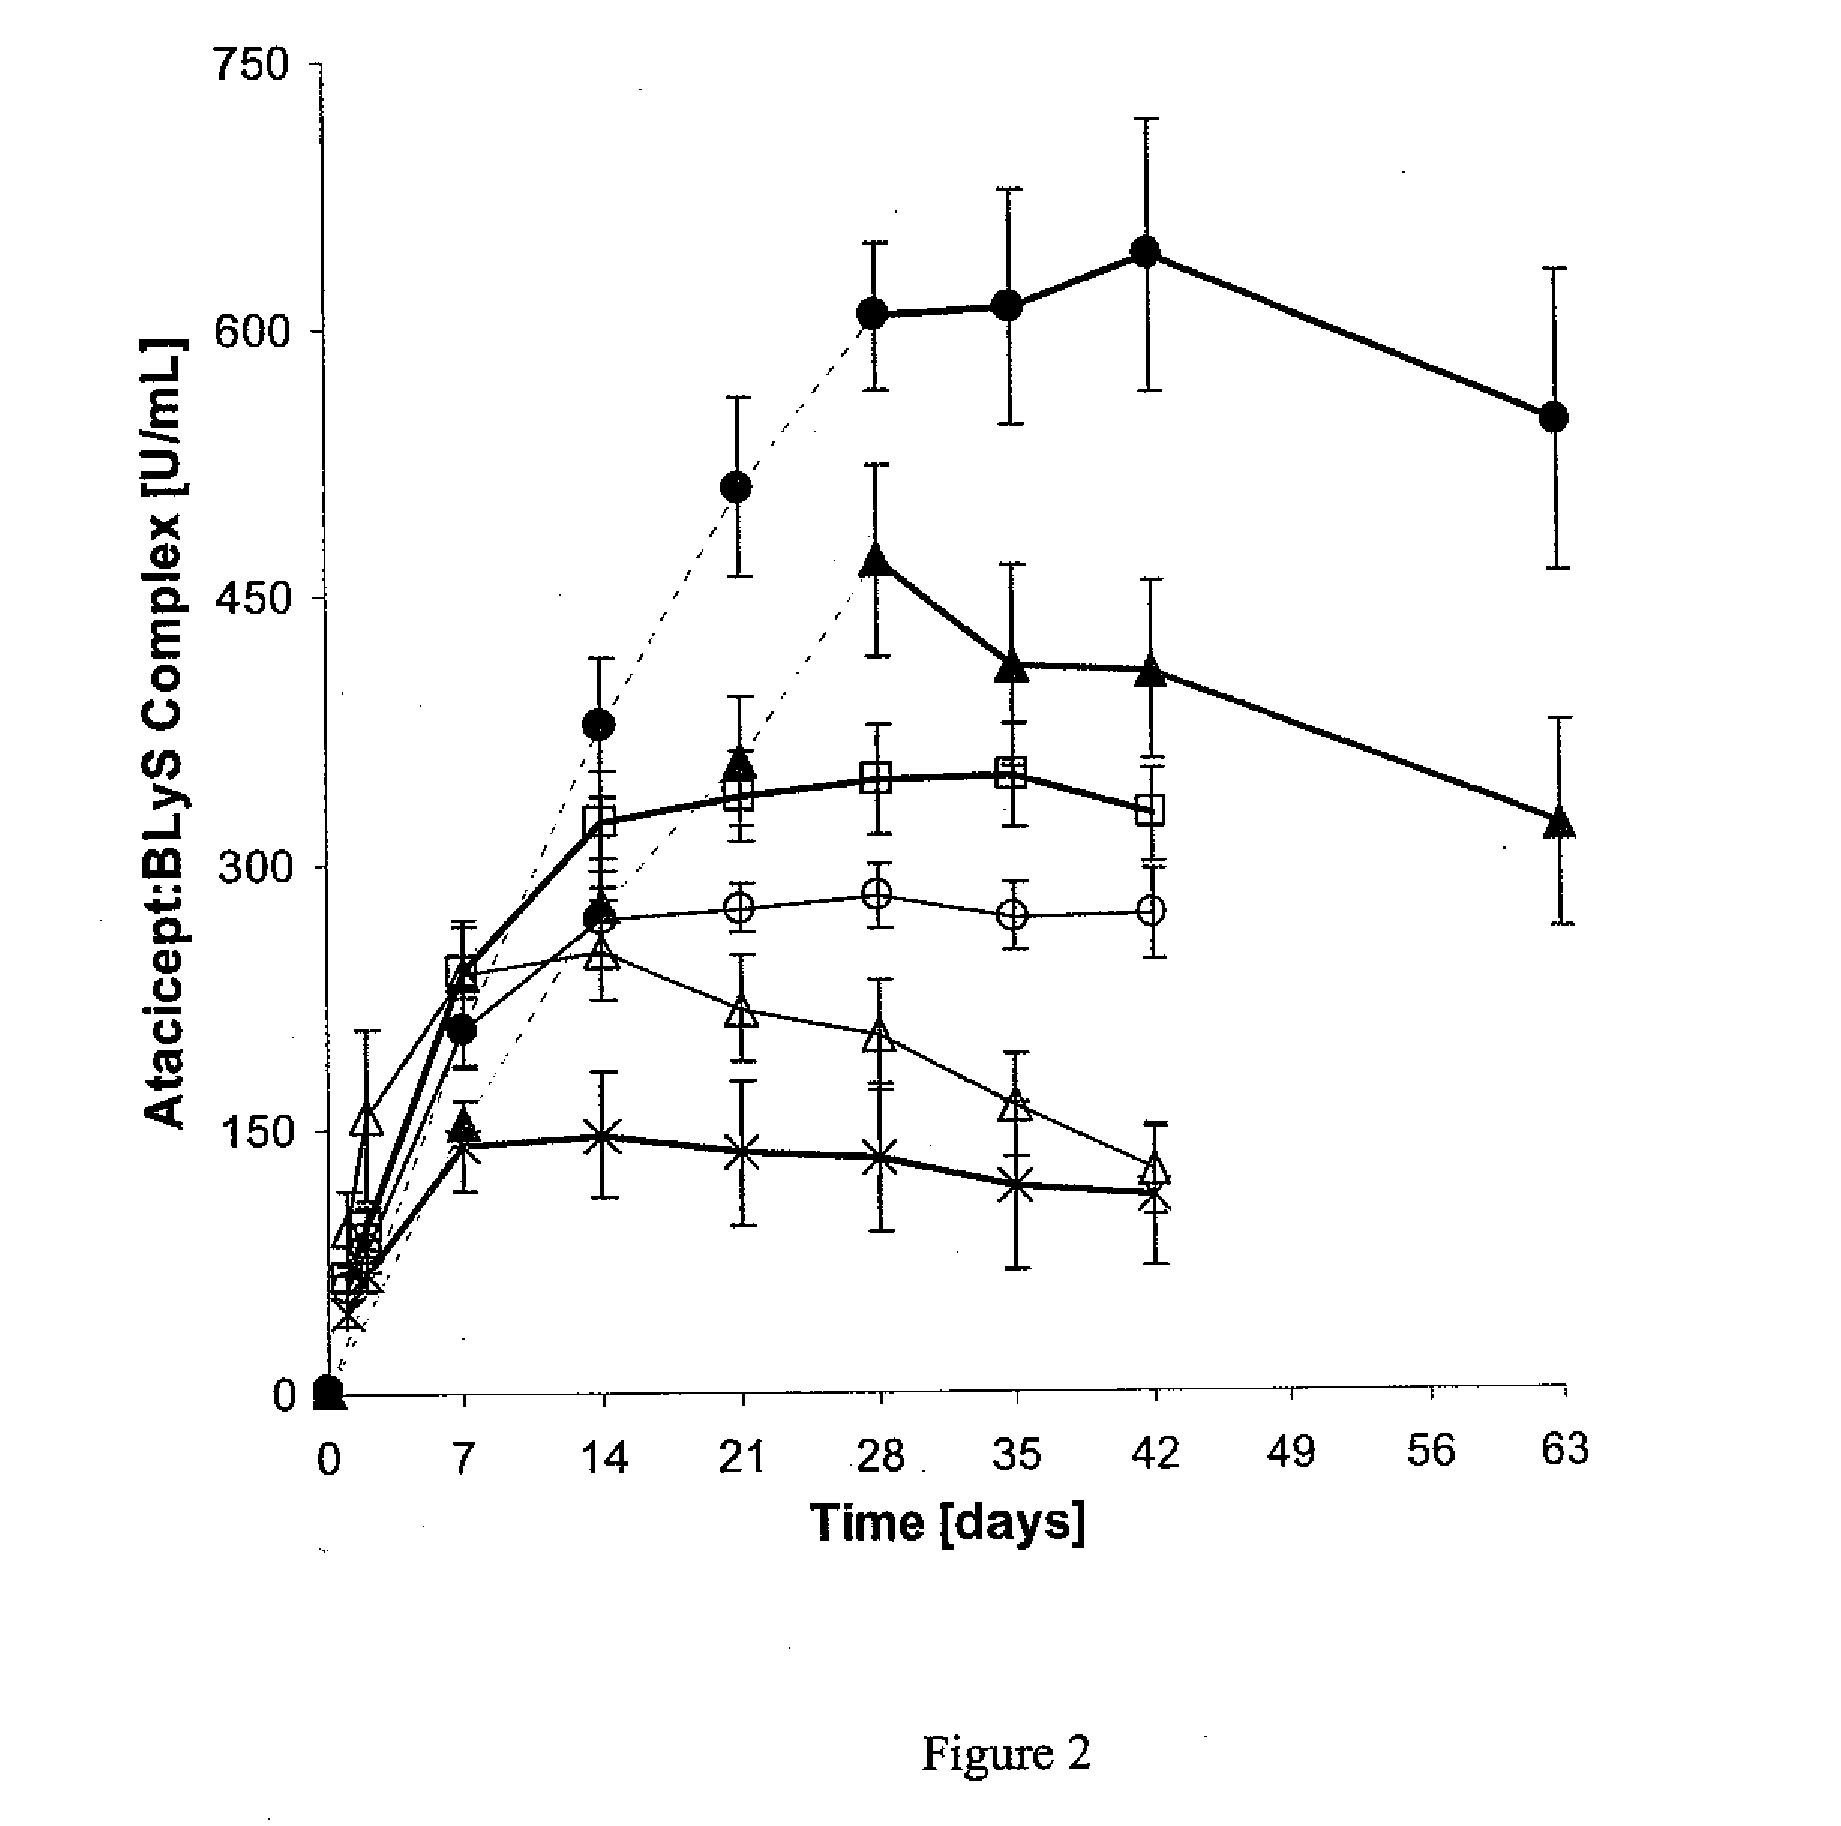 DOSING METHODS FOR TREATING AUTOIMMUNE DISEASES USING A TACI-Ig FUSION PROTEIN SUCH AS ATACICEPT